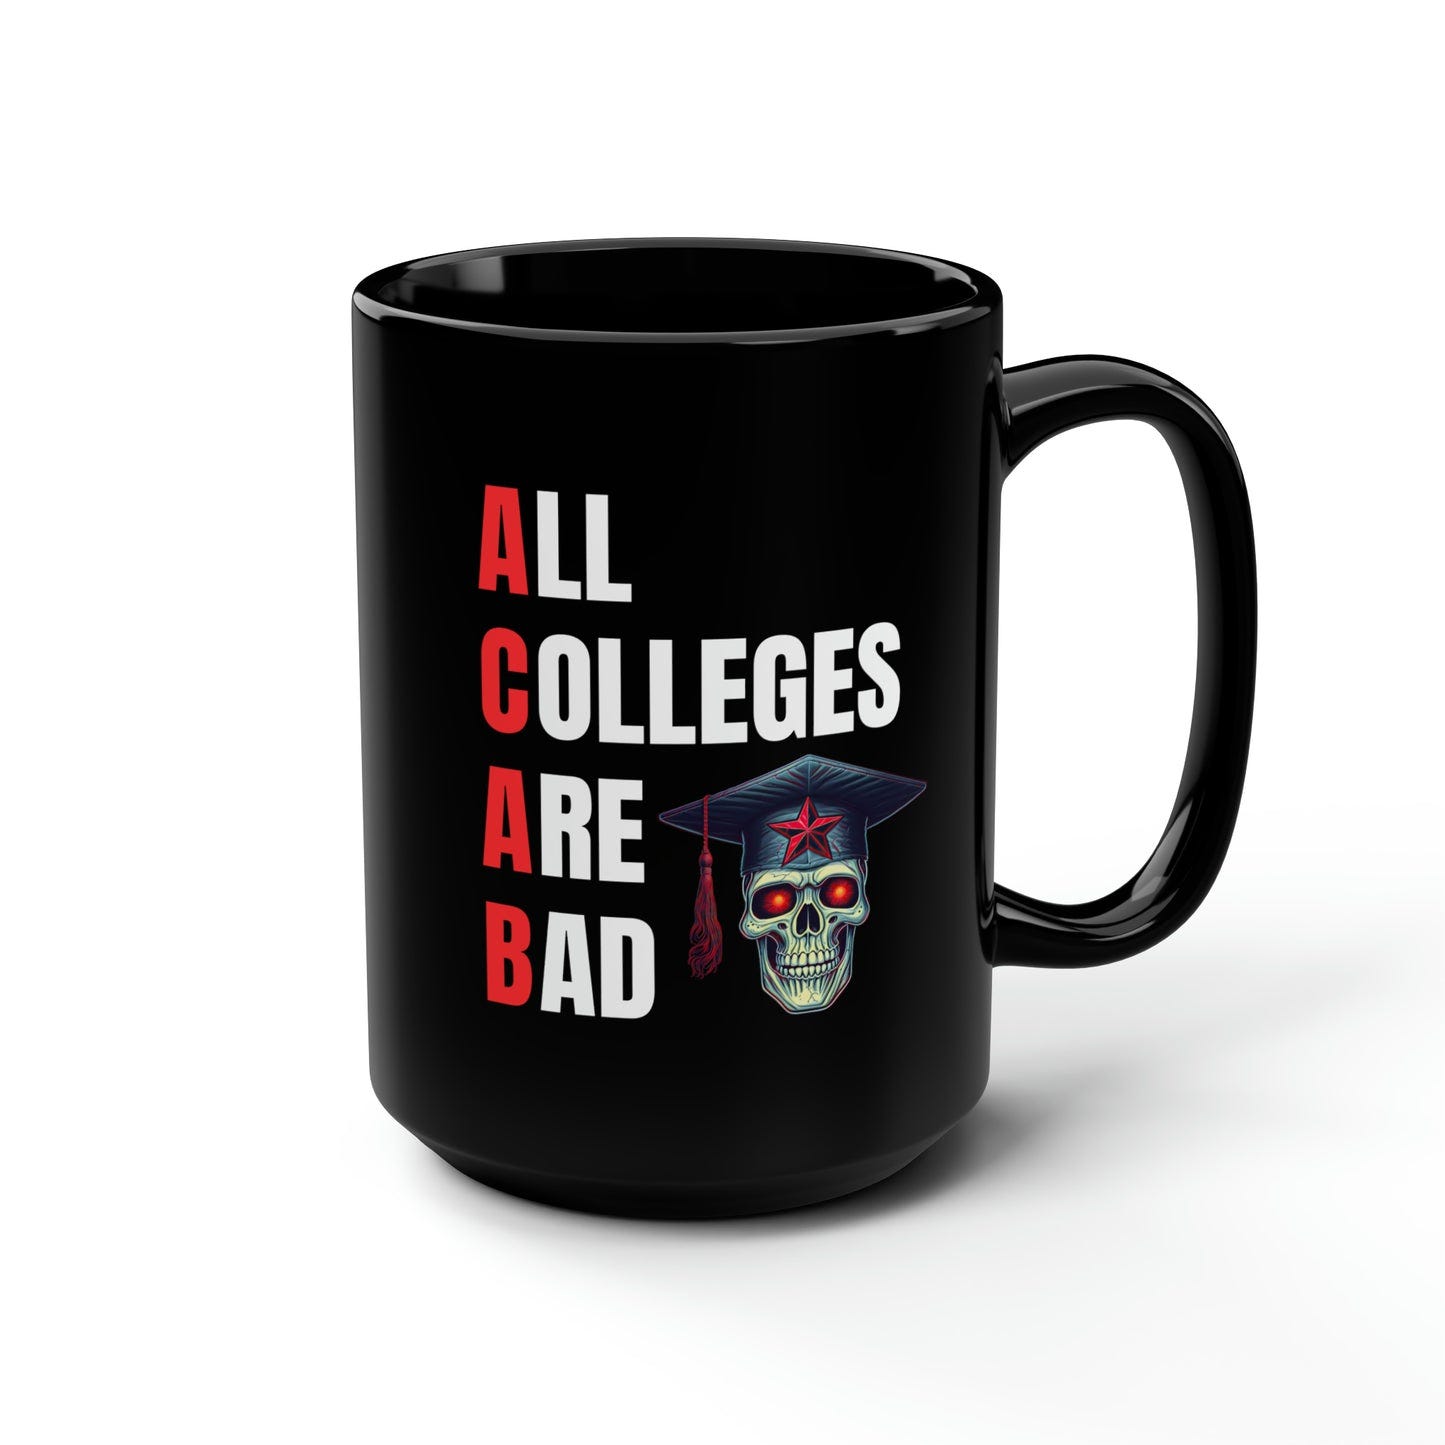 LIMITED EDITION: All Colleges Are Bad Black Mug, 15oz